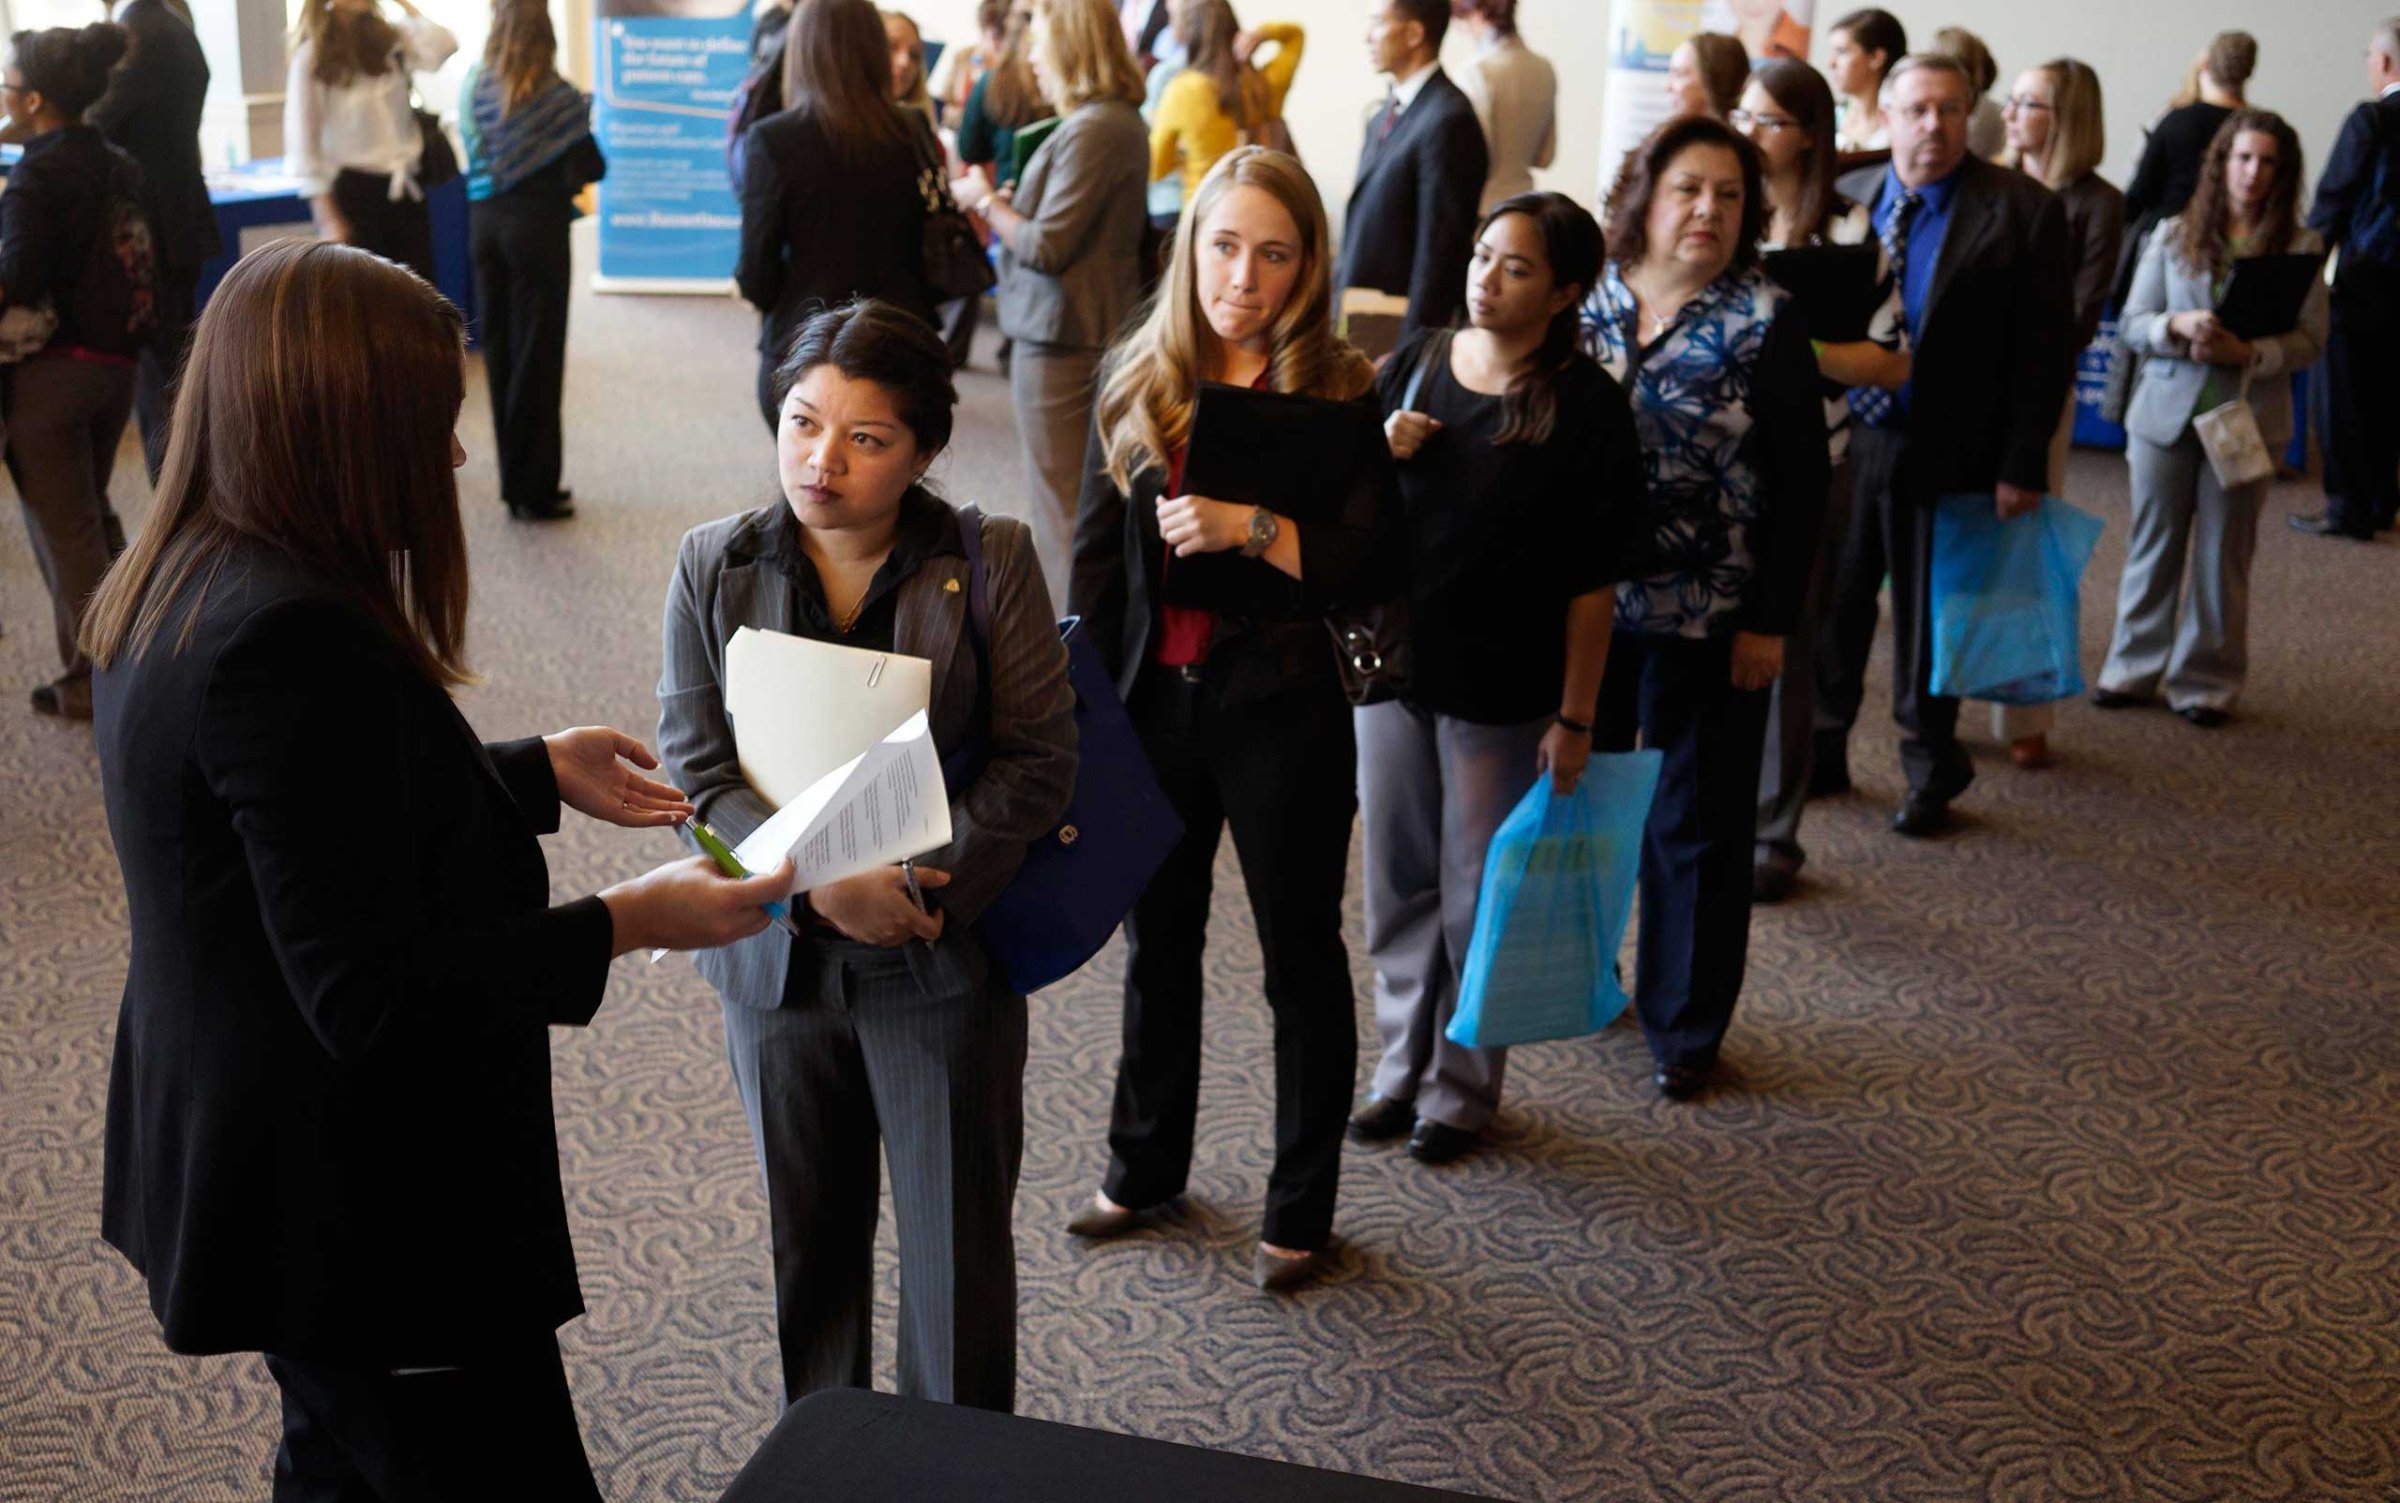 Jobseekers wait to talk to a recruiter at the Colorado Hospital Association's health care career event in Denver, Oct. 13, 2014.